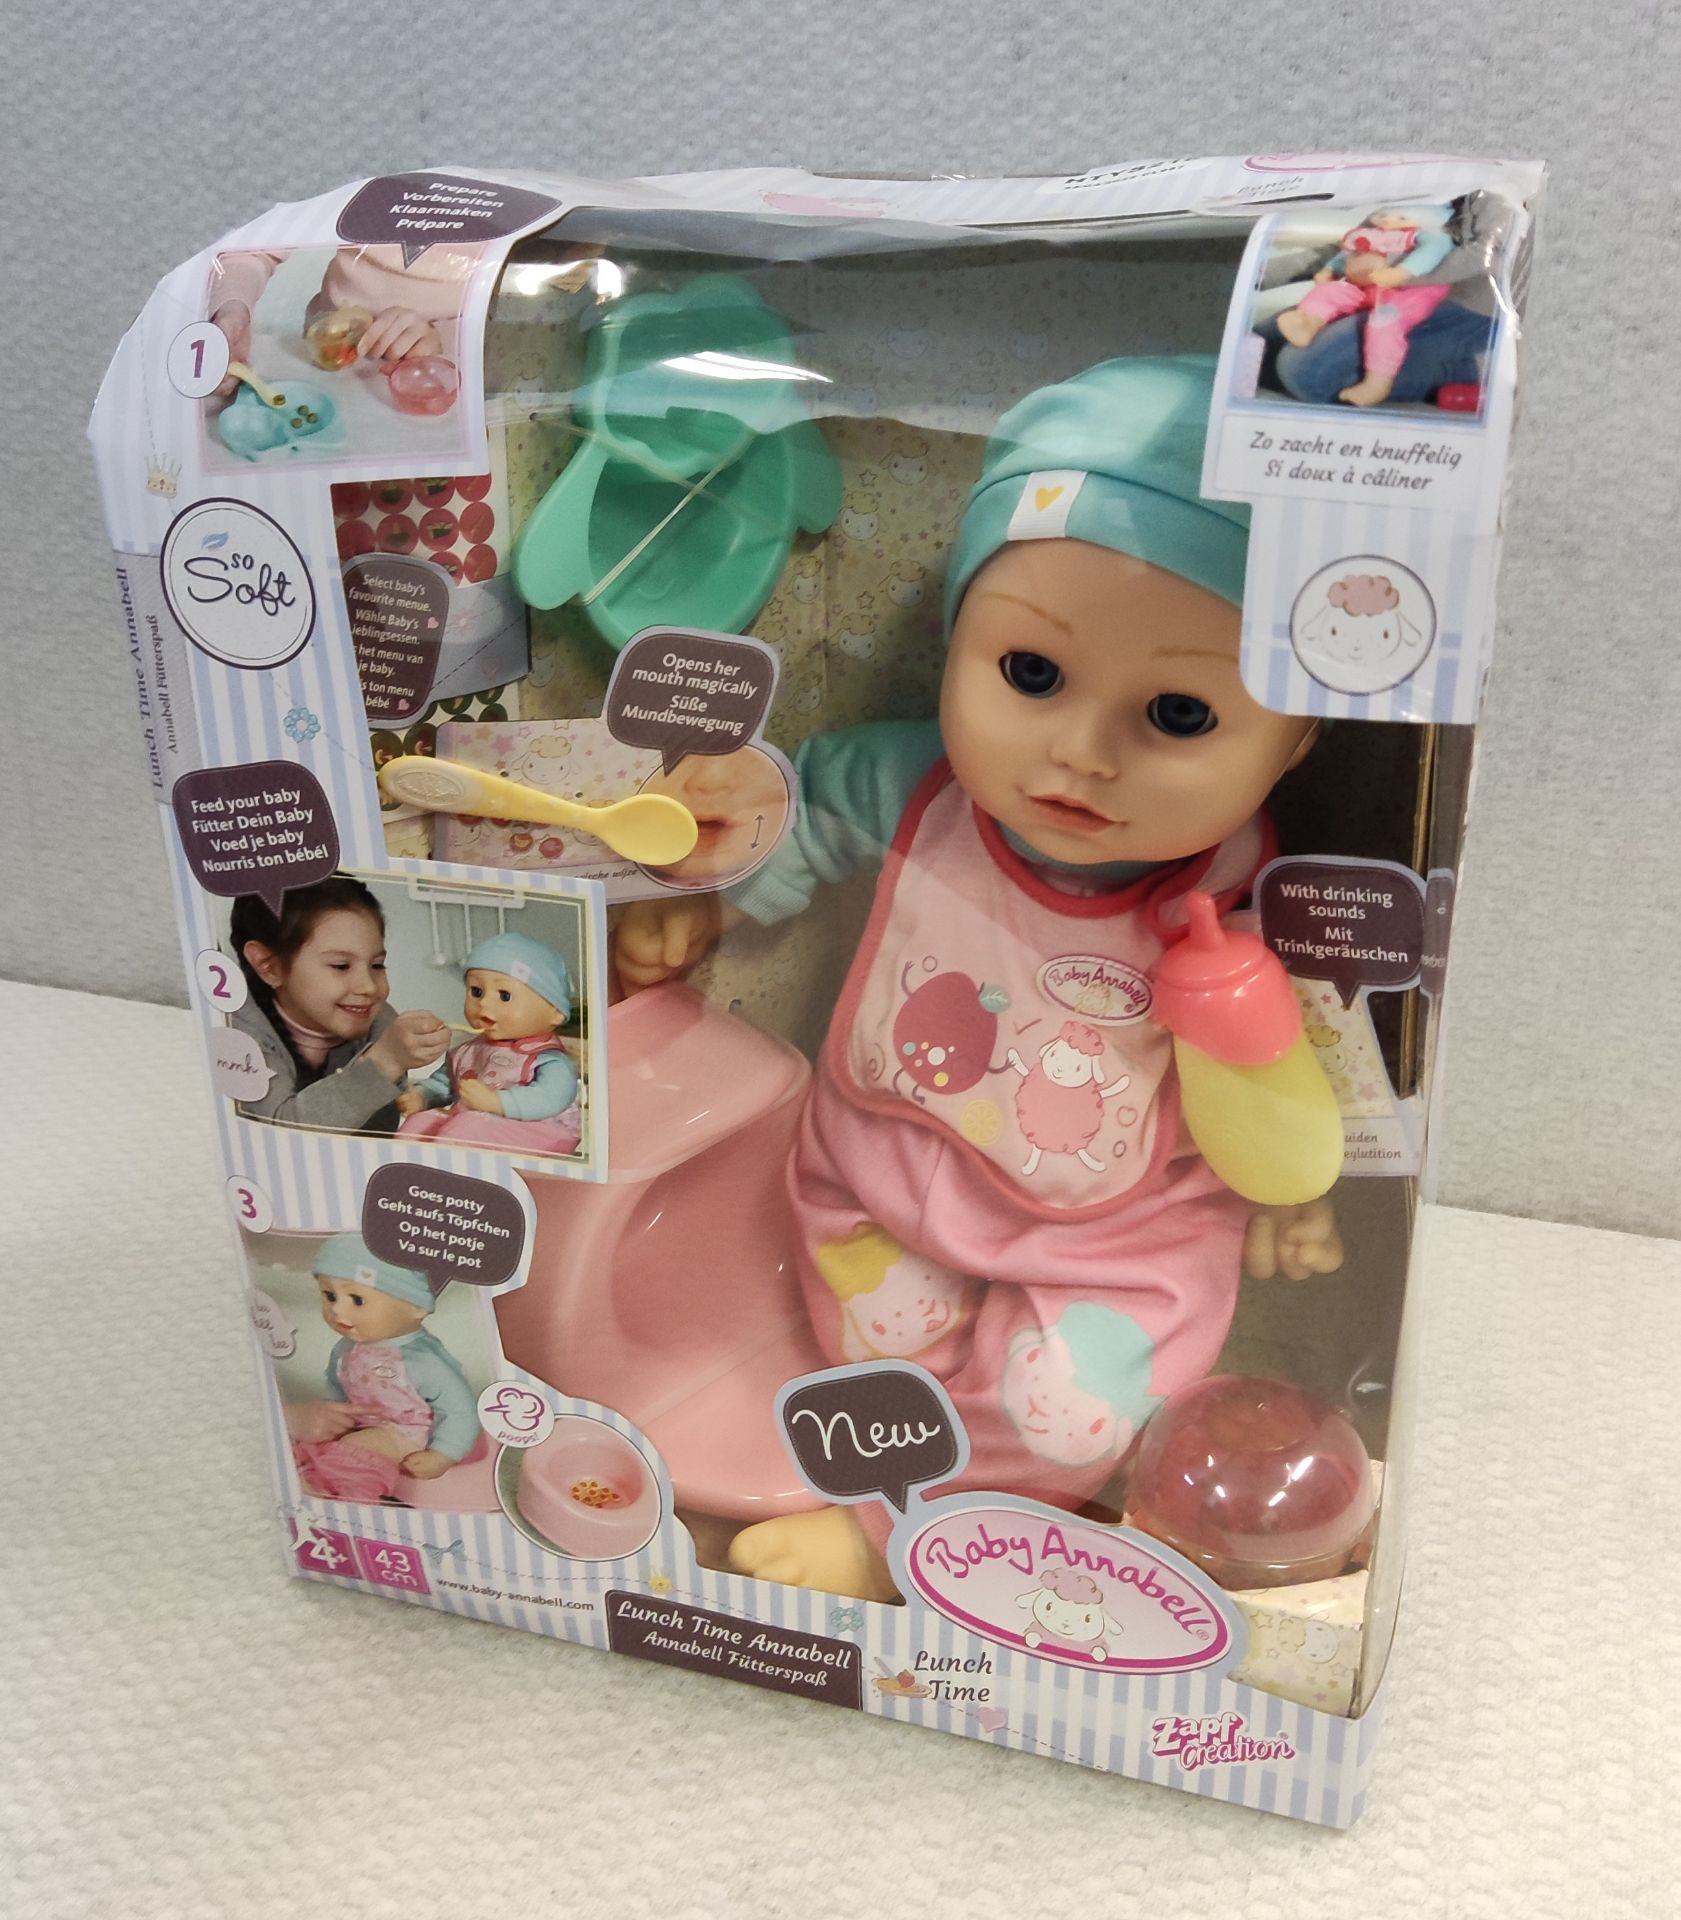 1 x Baby Annabell Lunch Time Annabell Set - New/Boxed - Image 3 of 9